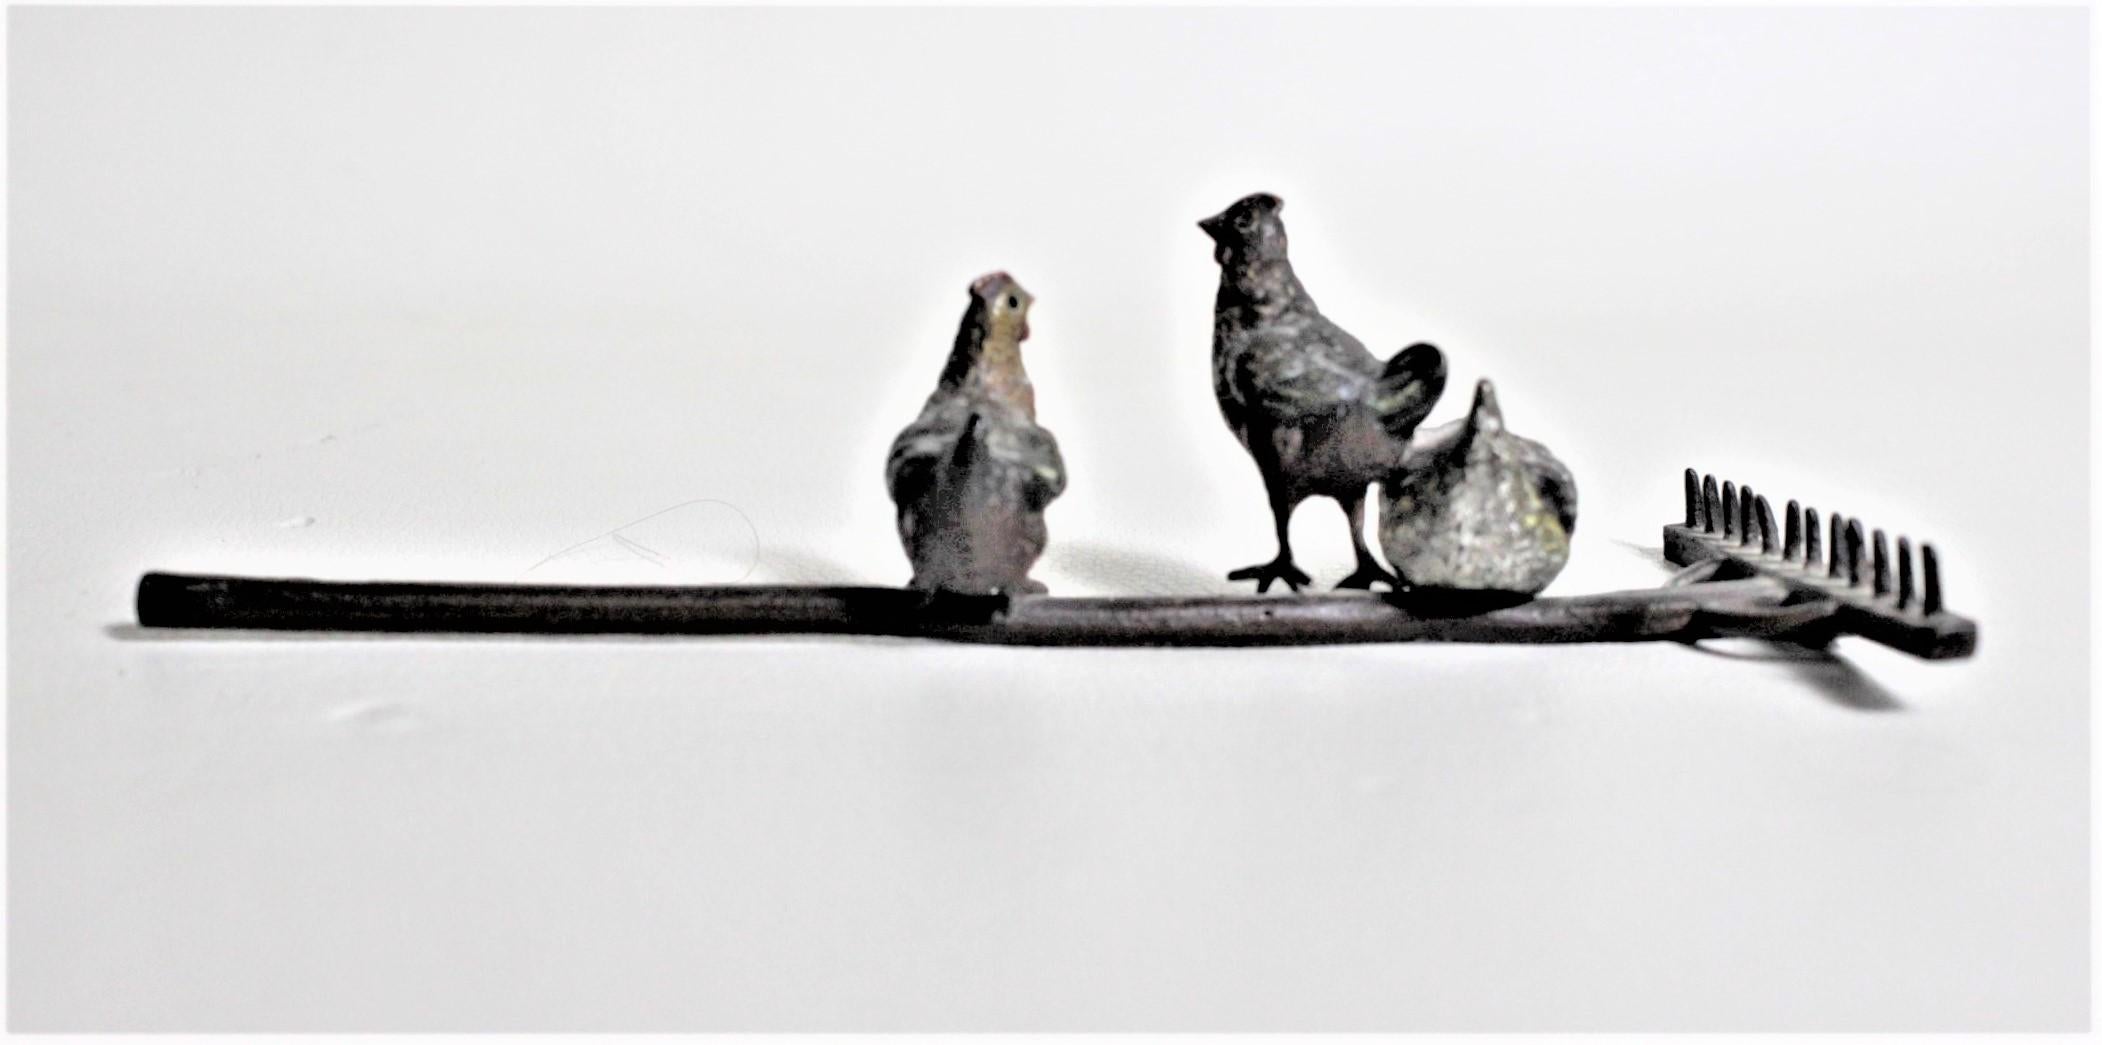 Cast Antique Austrian Cold-Painted Bronze of Chickens Perched on a Rake Sculpture